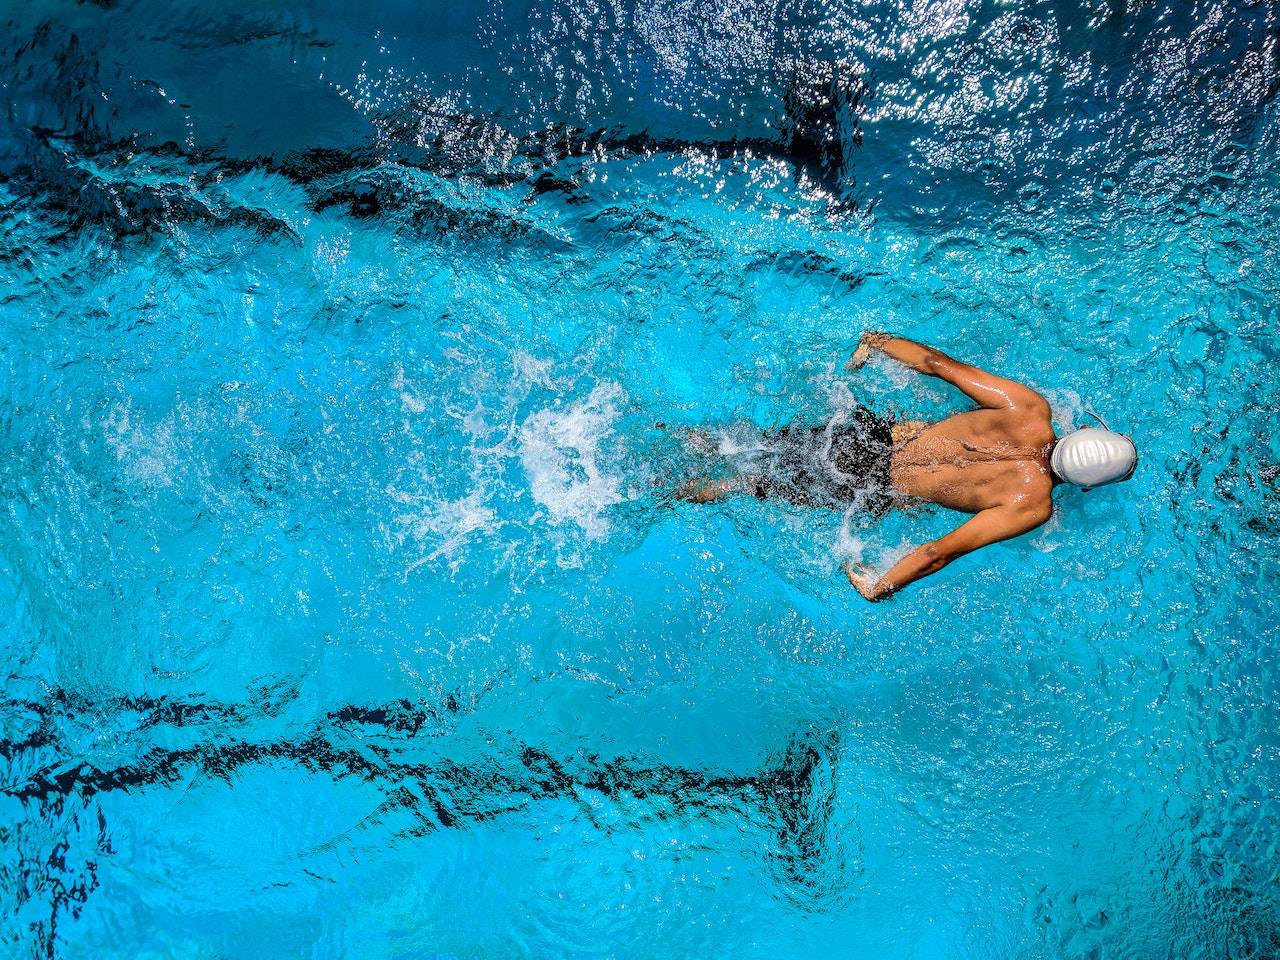 Hobbies that Will Take Your Focus To The Next Level - Swimming